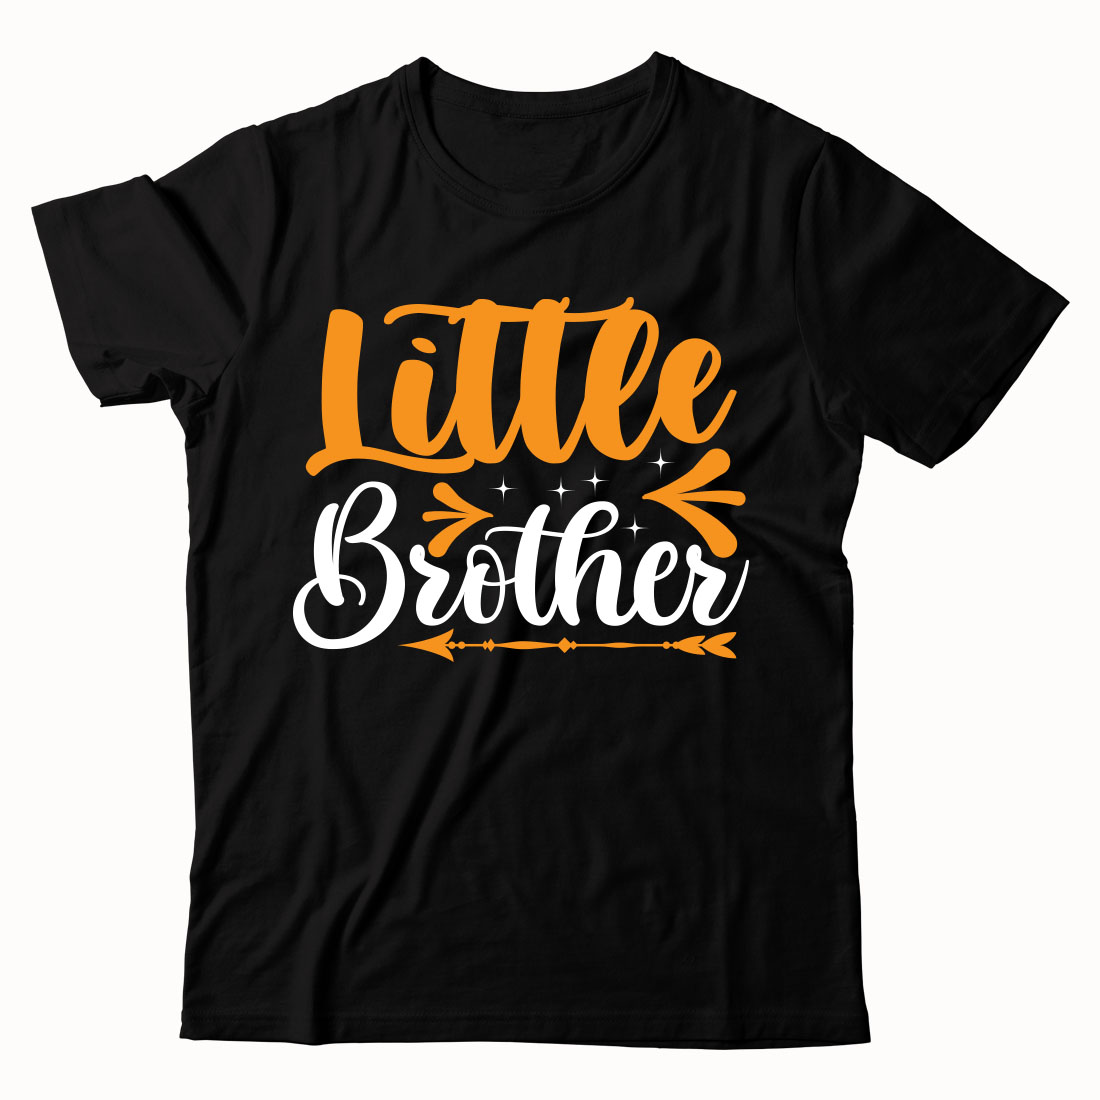 Black t - shirt that says little brother.